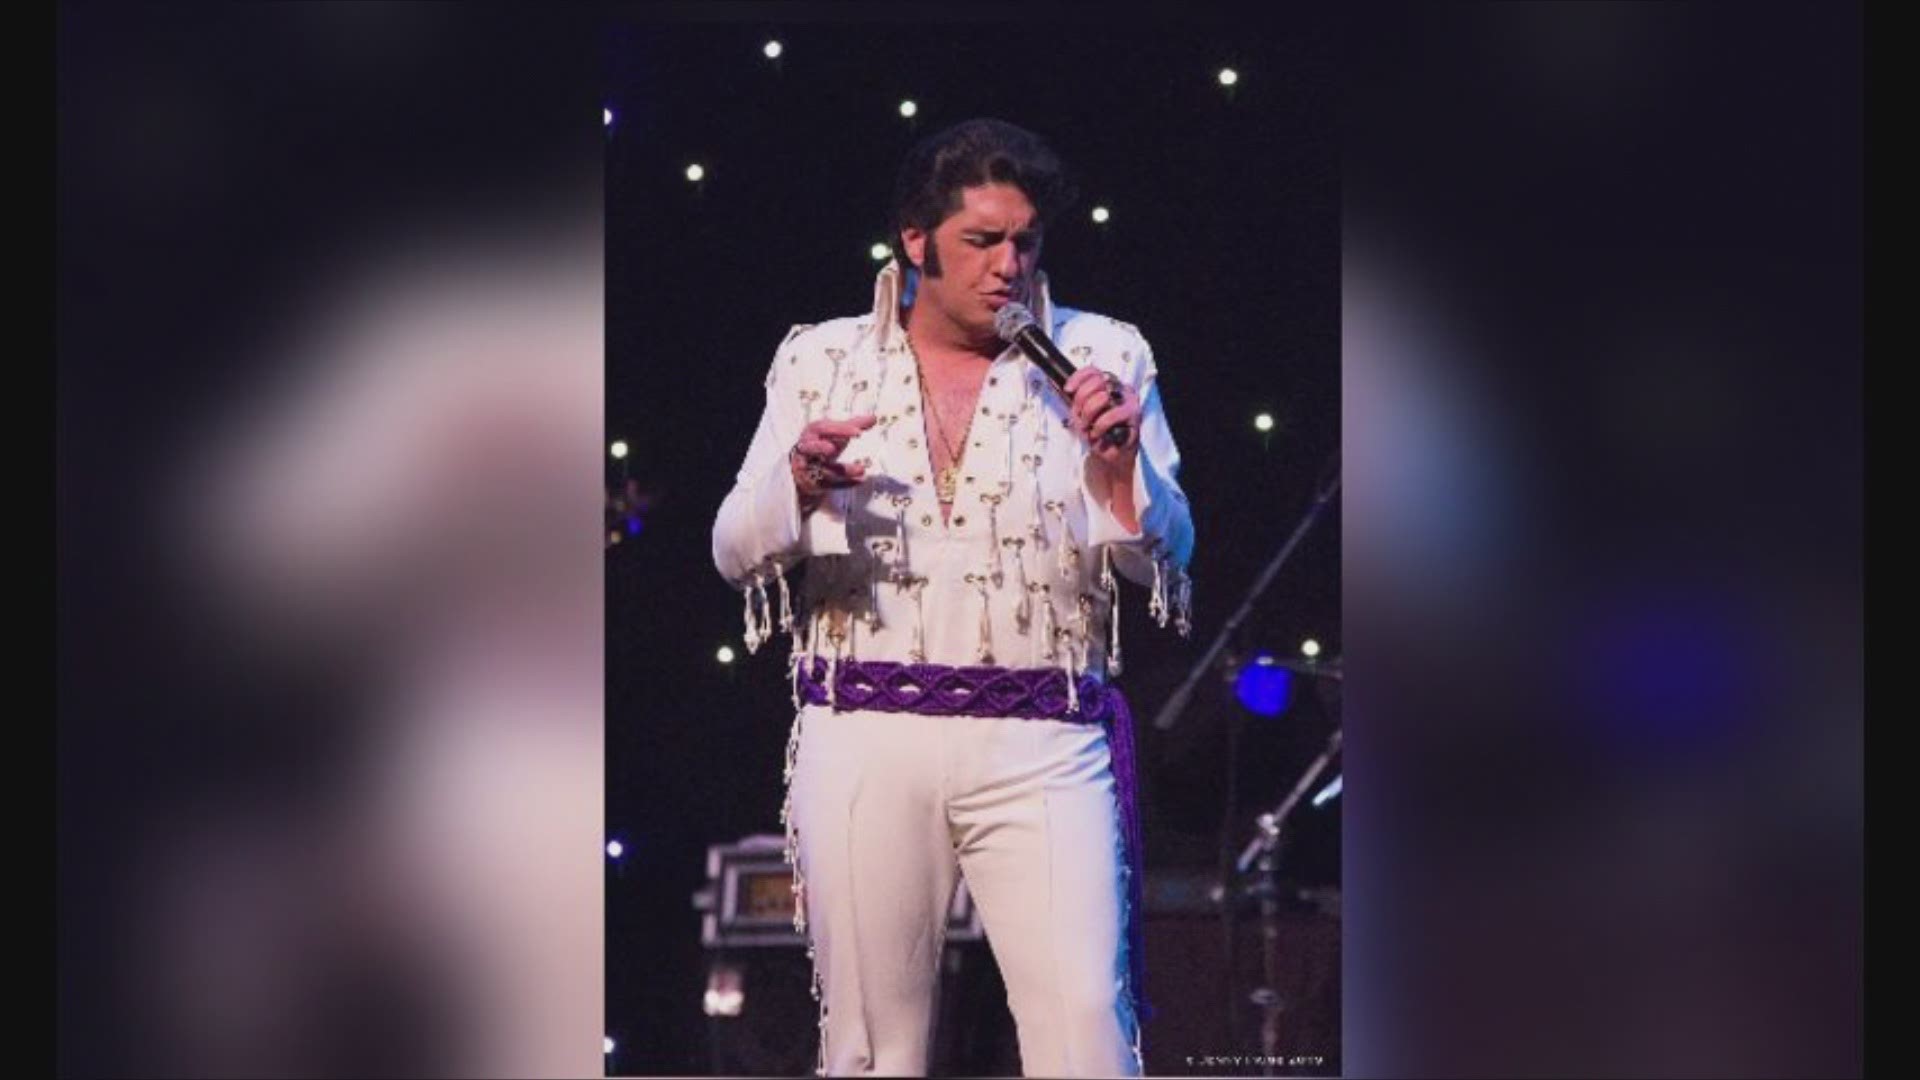 Elvis impersonator, Jason Baglio, was shot and killed in Livingston Parish Saturday morning. Deputies are investigating why.